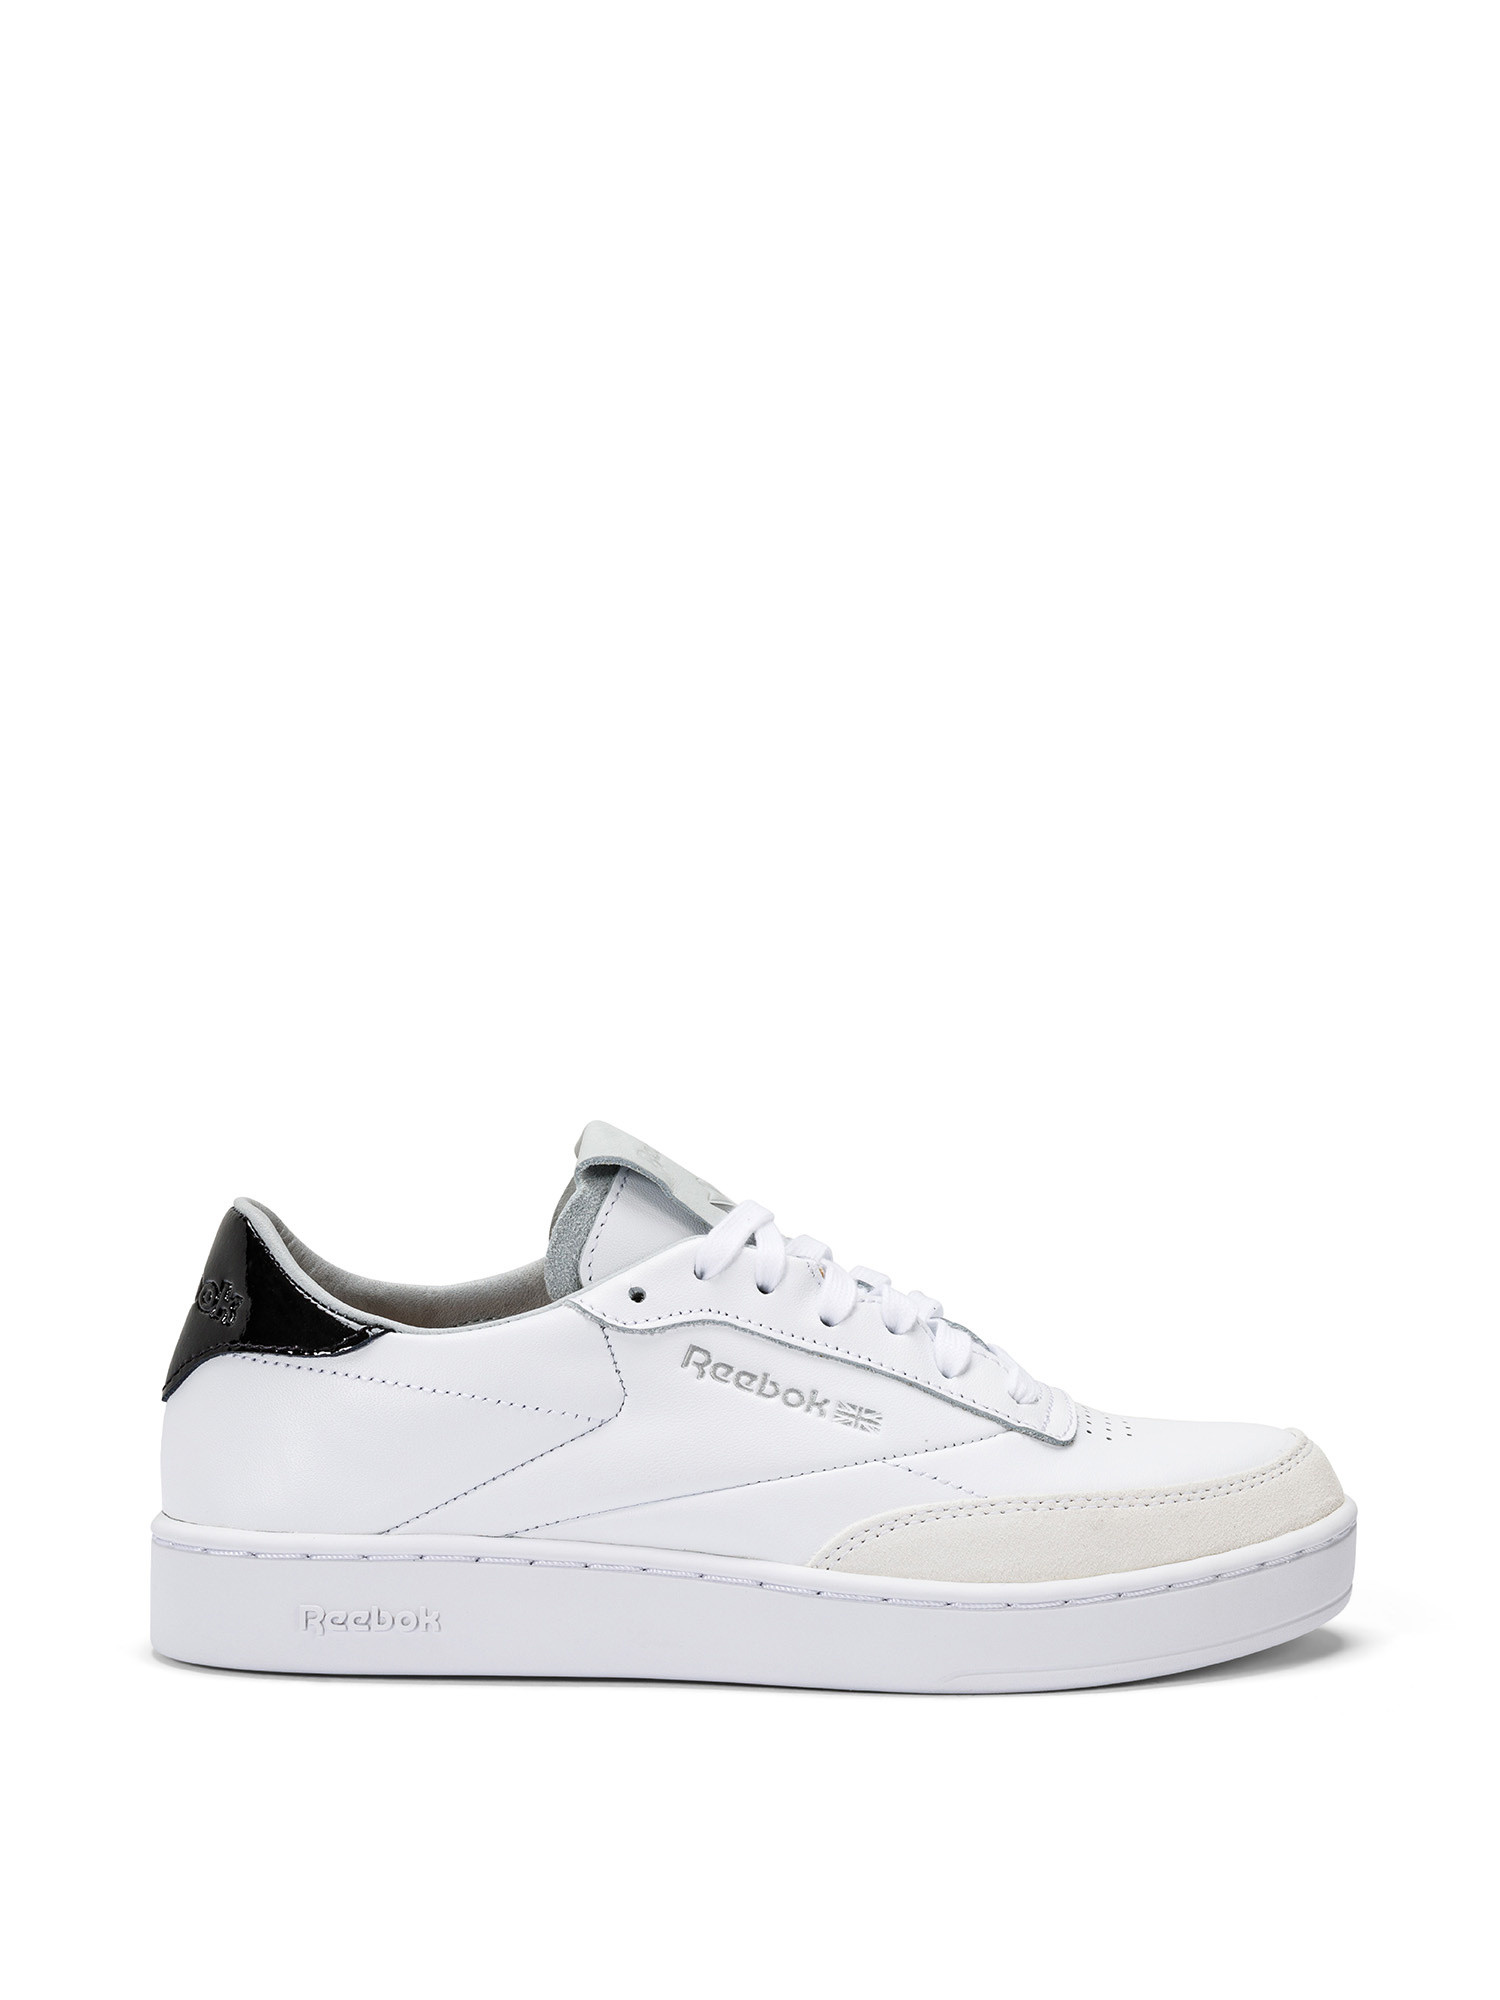 Reebok - Club C Clean Shoes, White, large image number 0